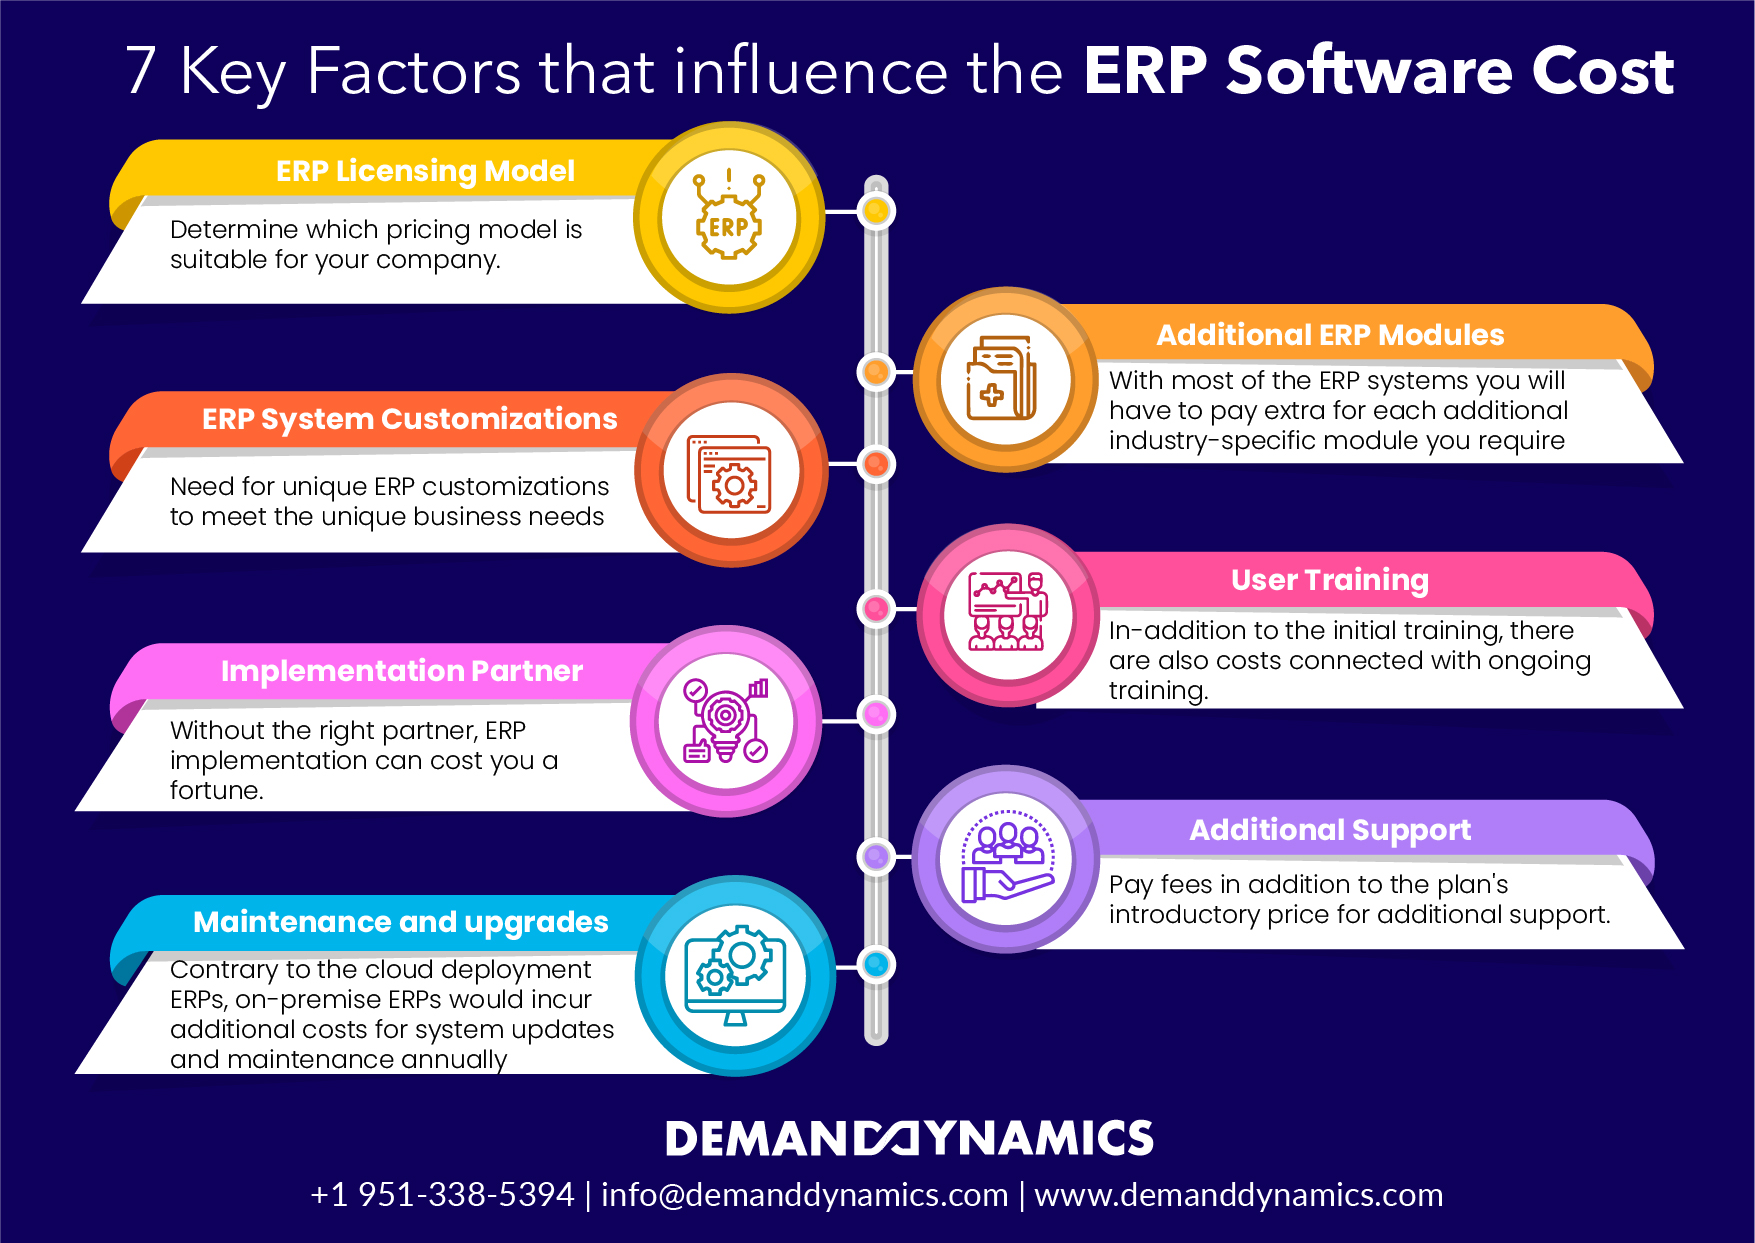 7 Key Factors that influence the ERP Software Cost